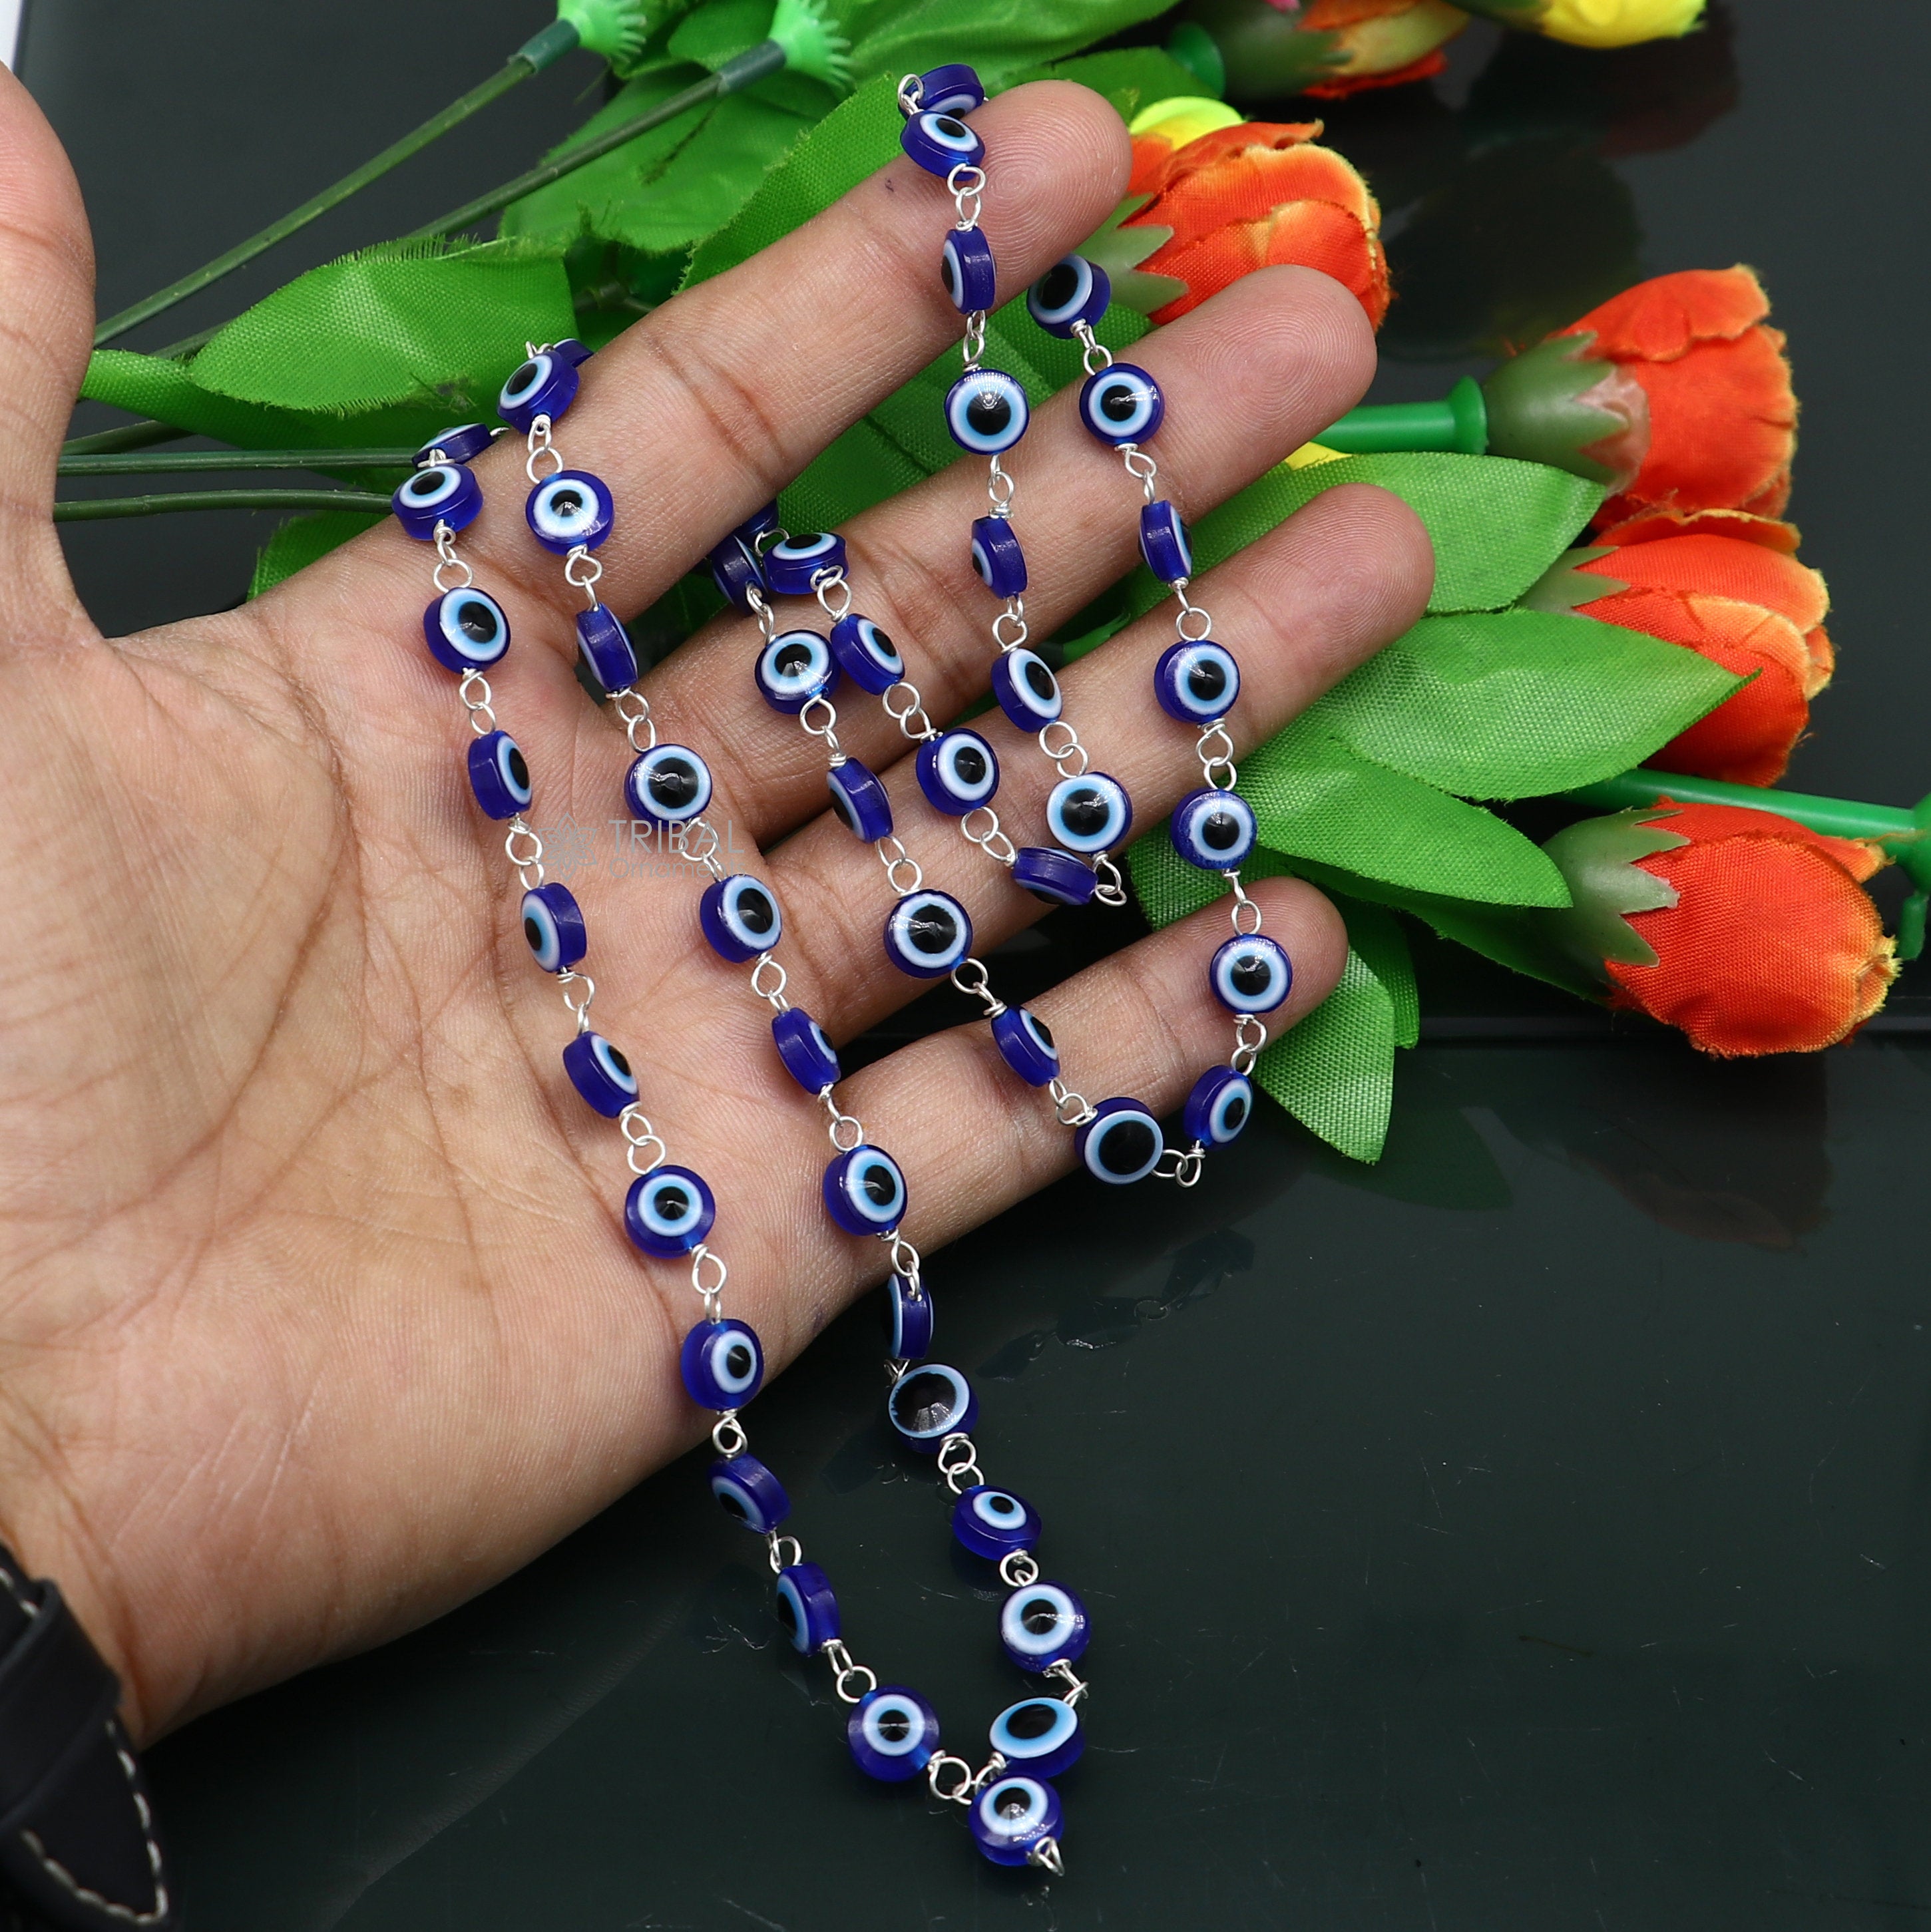 XHUUU Black Obsidian with Evil Eye Beads Long Necklaces for Women and Men  Crystals and Healing Stones Meditation Balance Necklace | Amazon.com